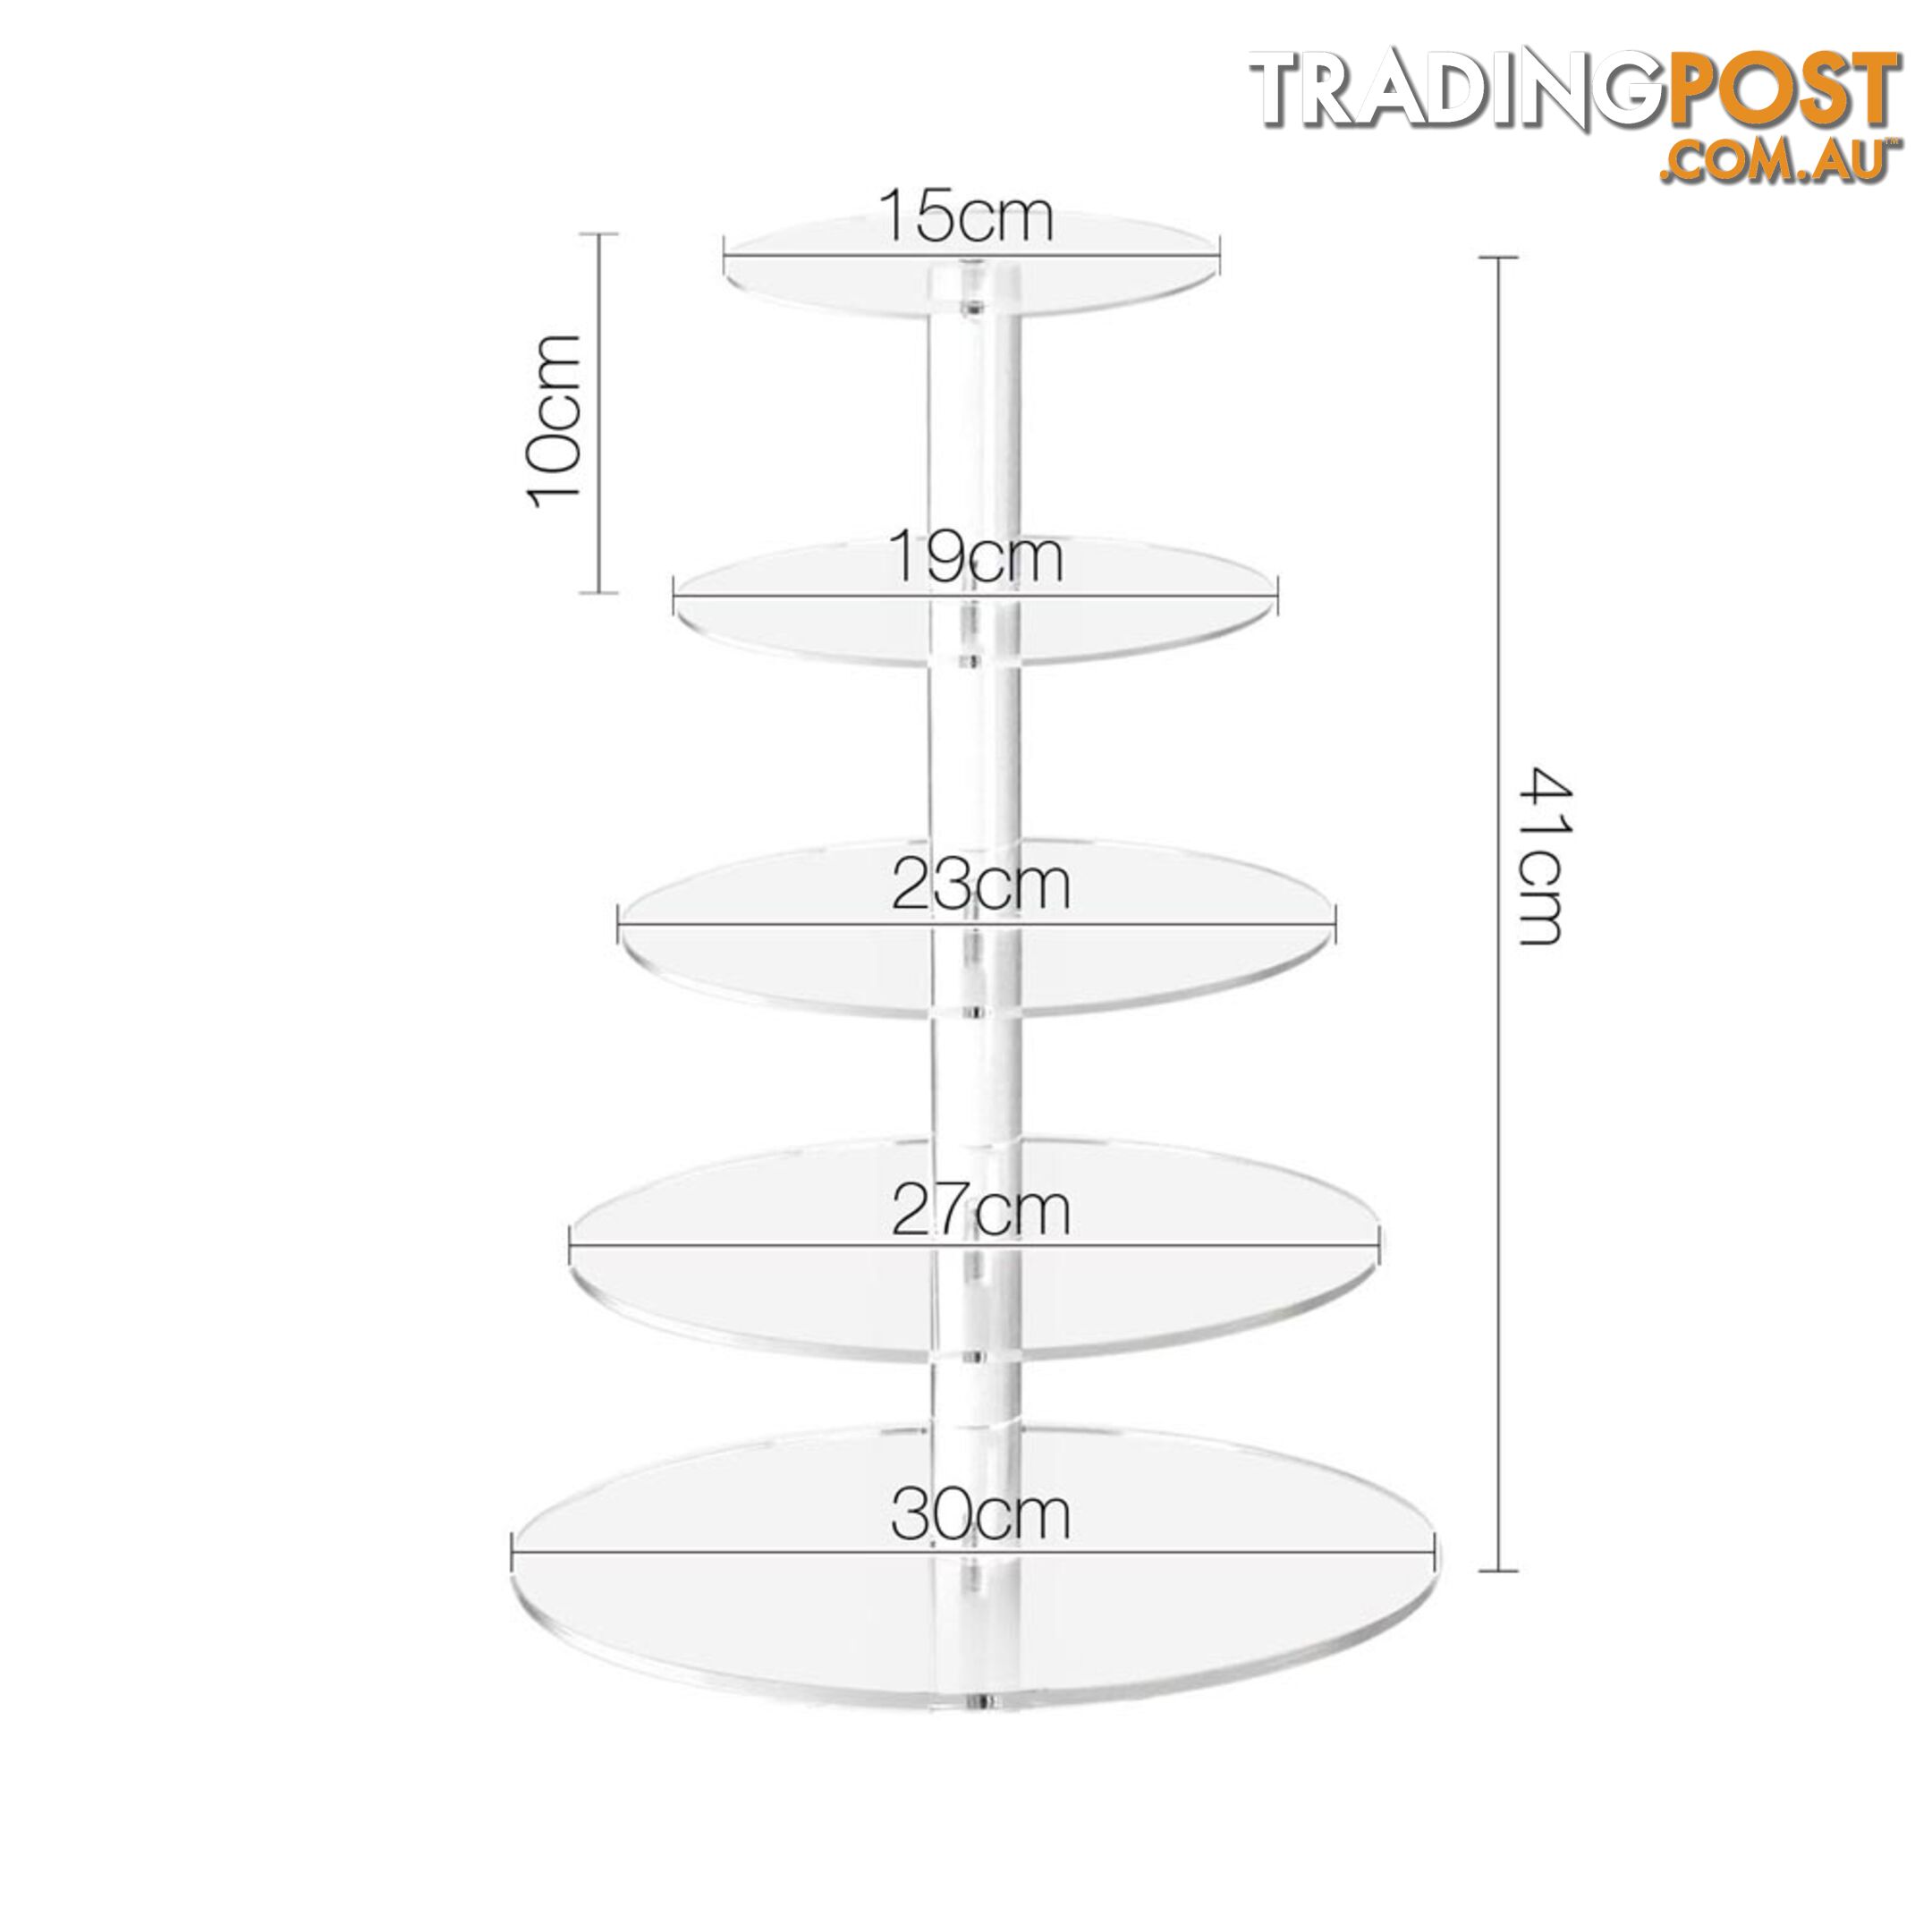 5 Tier Clear Acrylic Cake Stand 41CM